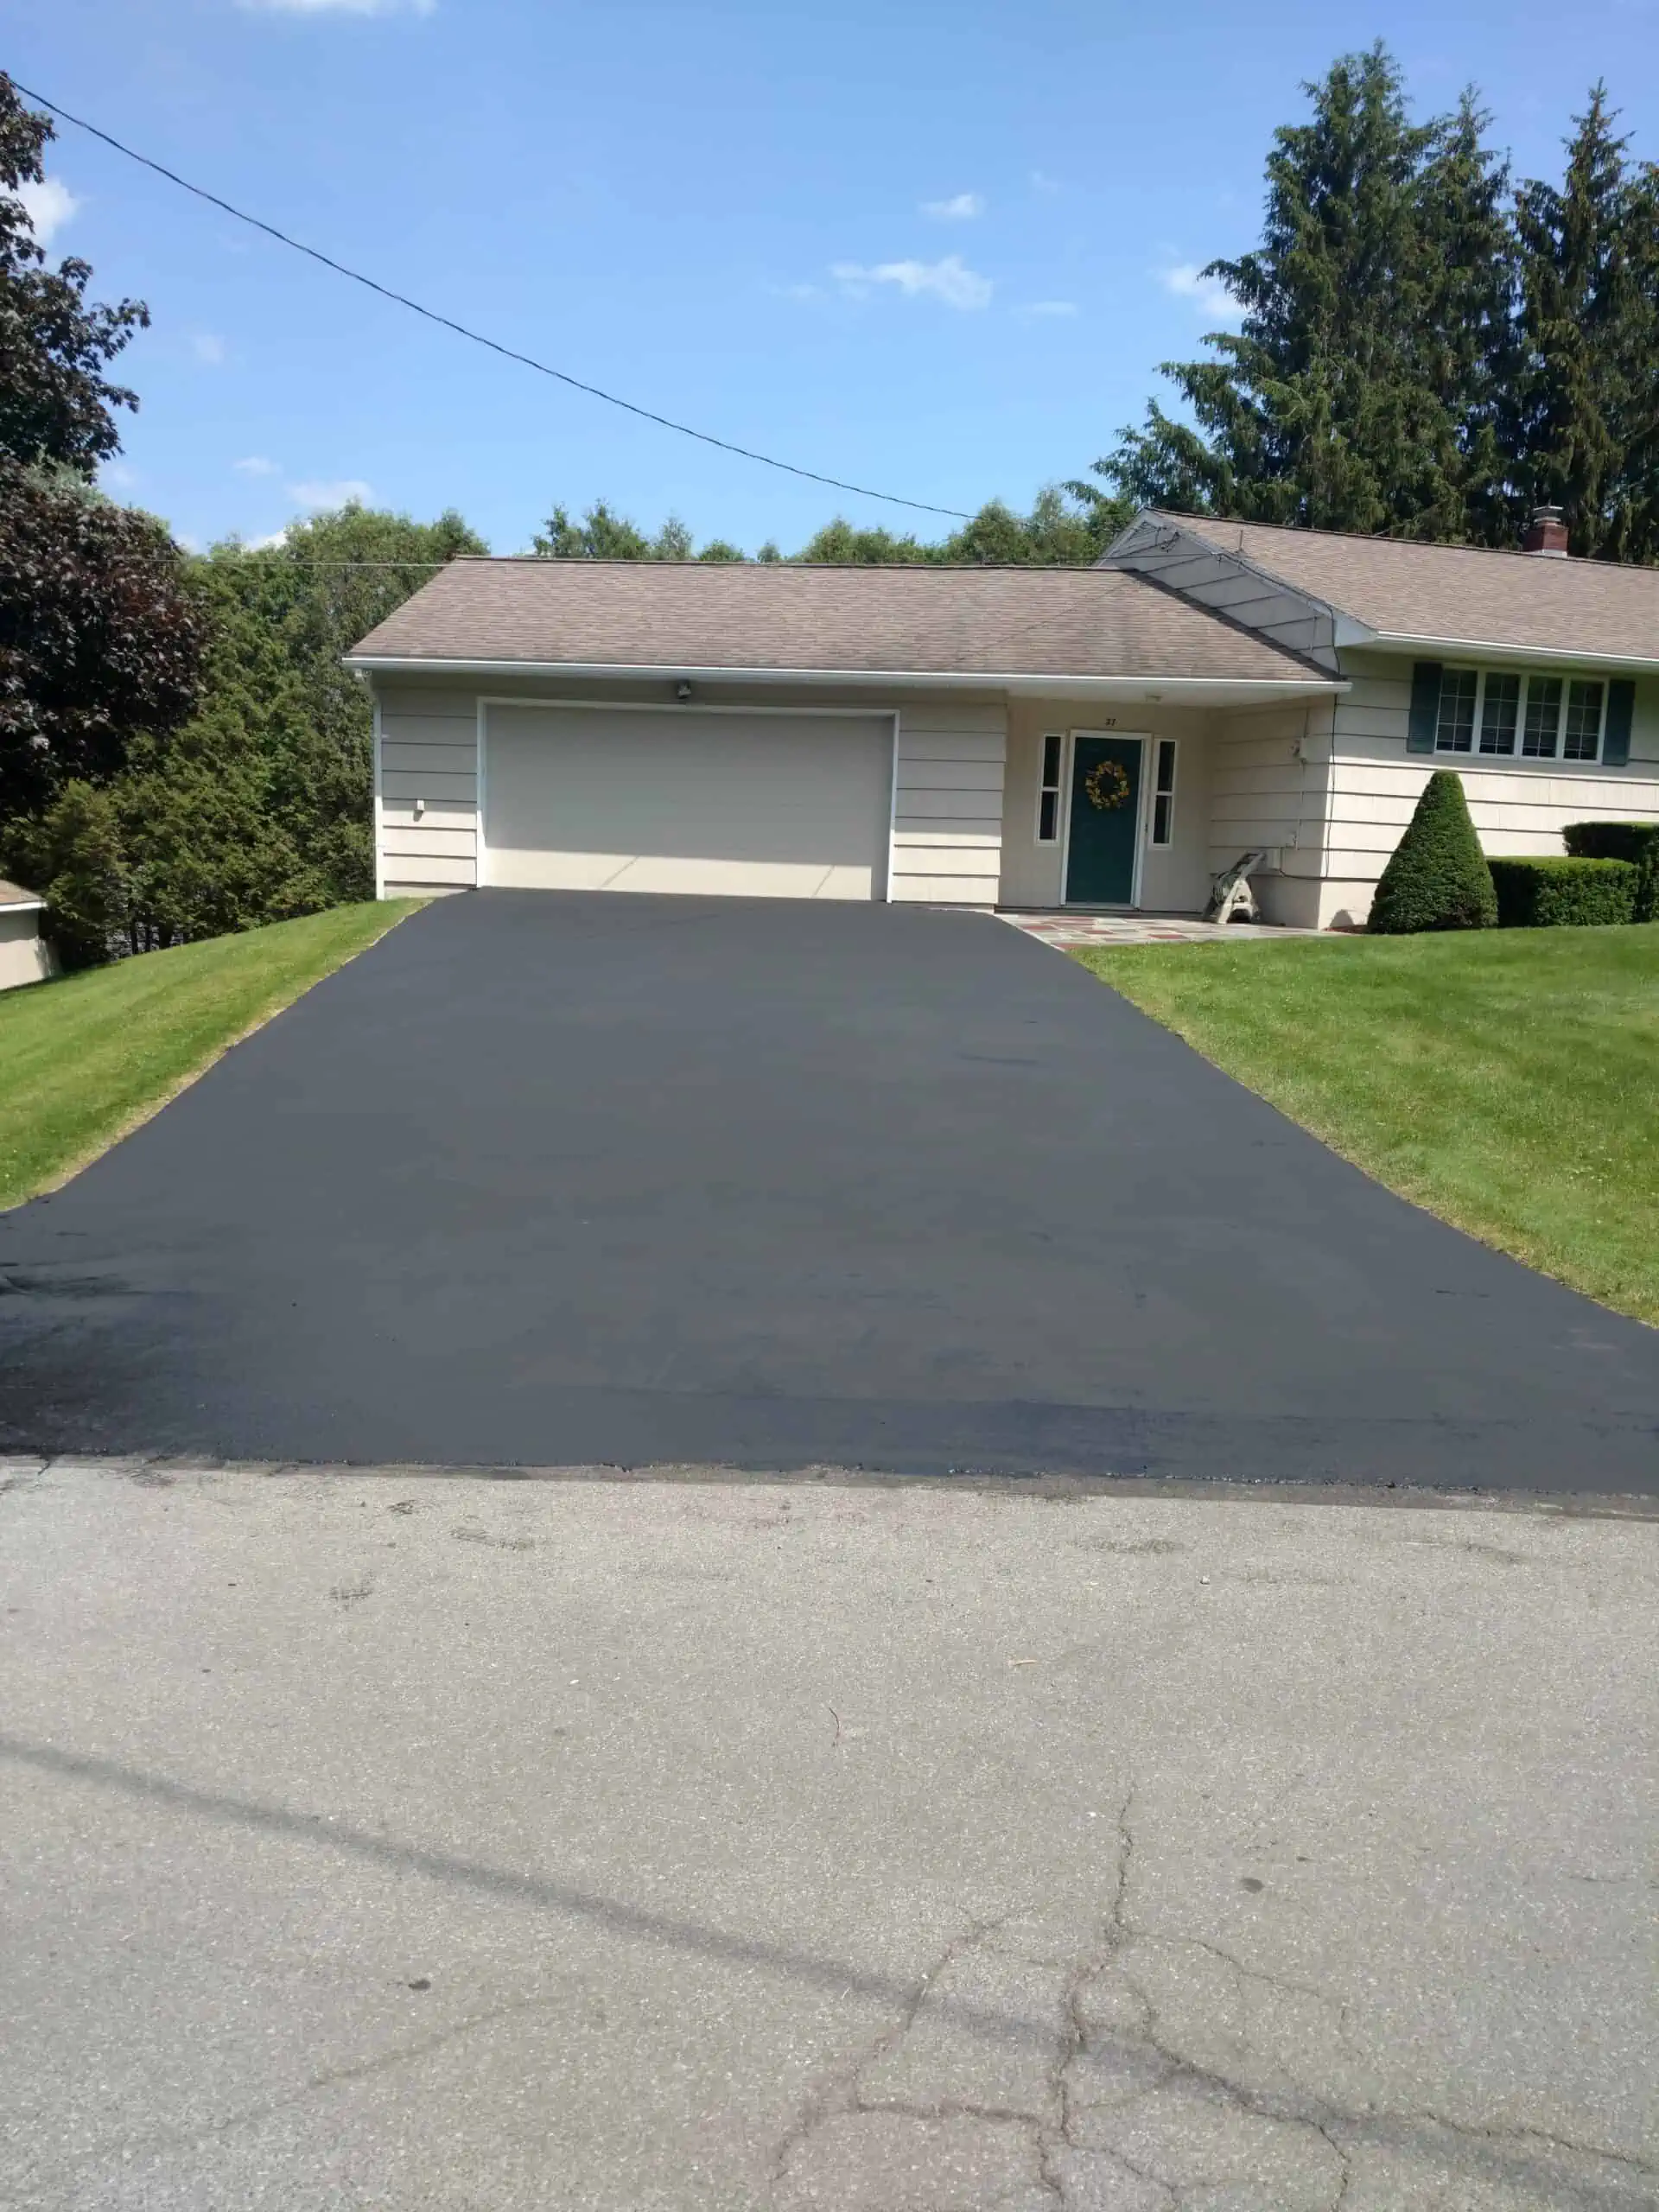 Asphalt sealcoating can add resistance and protection to your Westmoreland, New Hartford, or Clinton driveway! Call Newman Landscaping & Sealcoating today! 